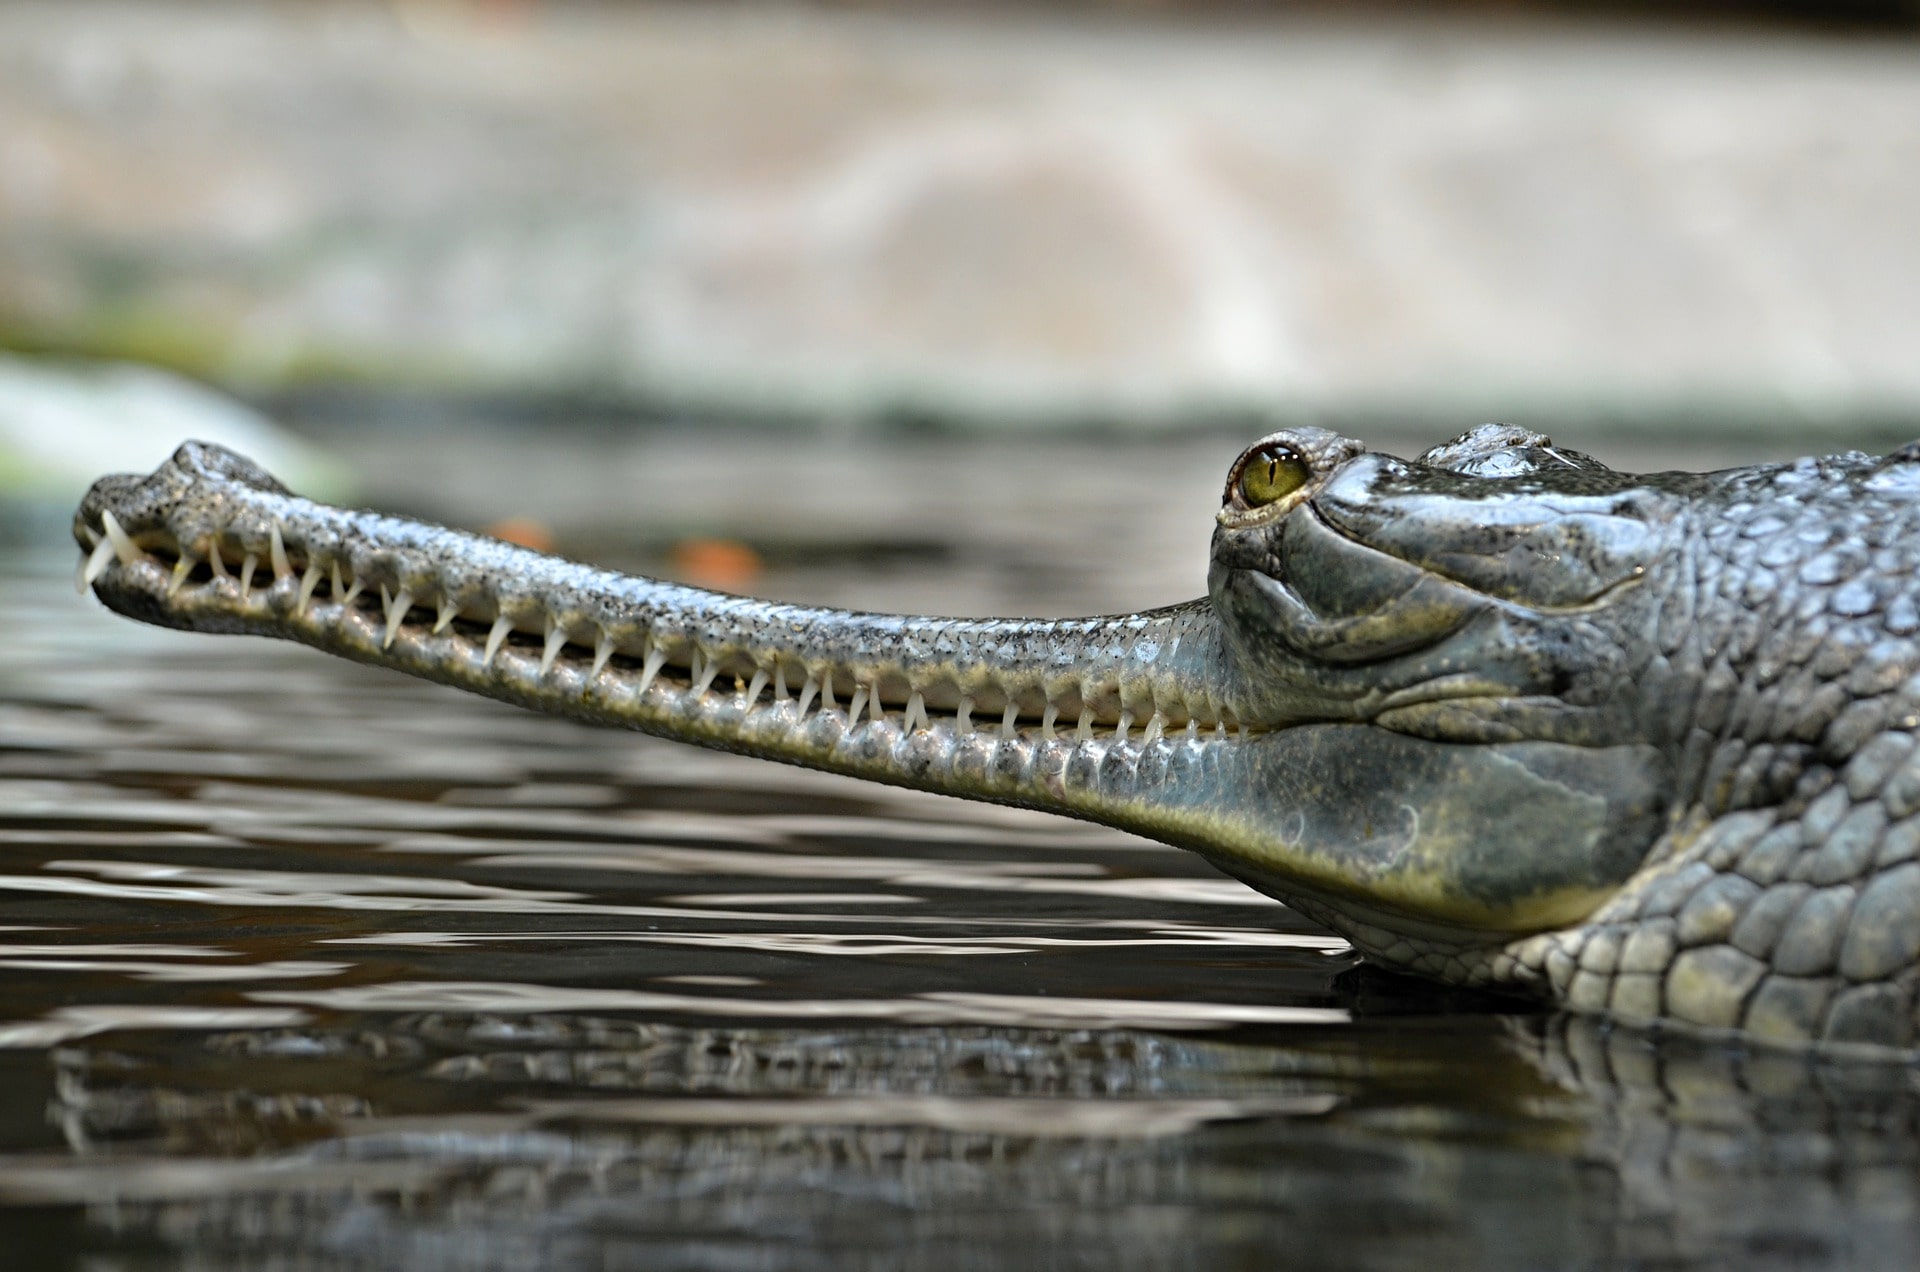 About Gharial, Reptile With Giant Narrow Snout